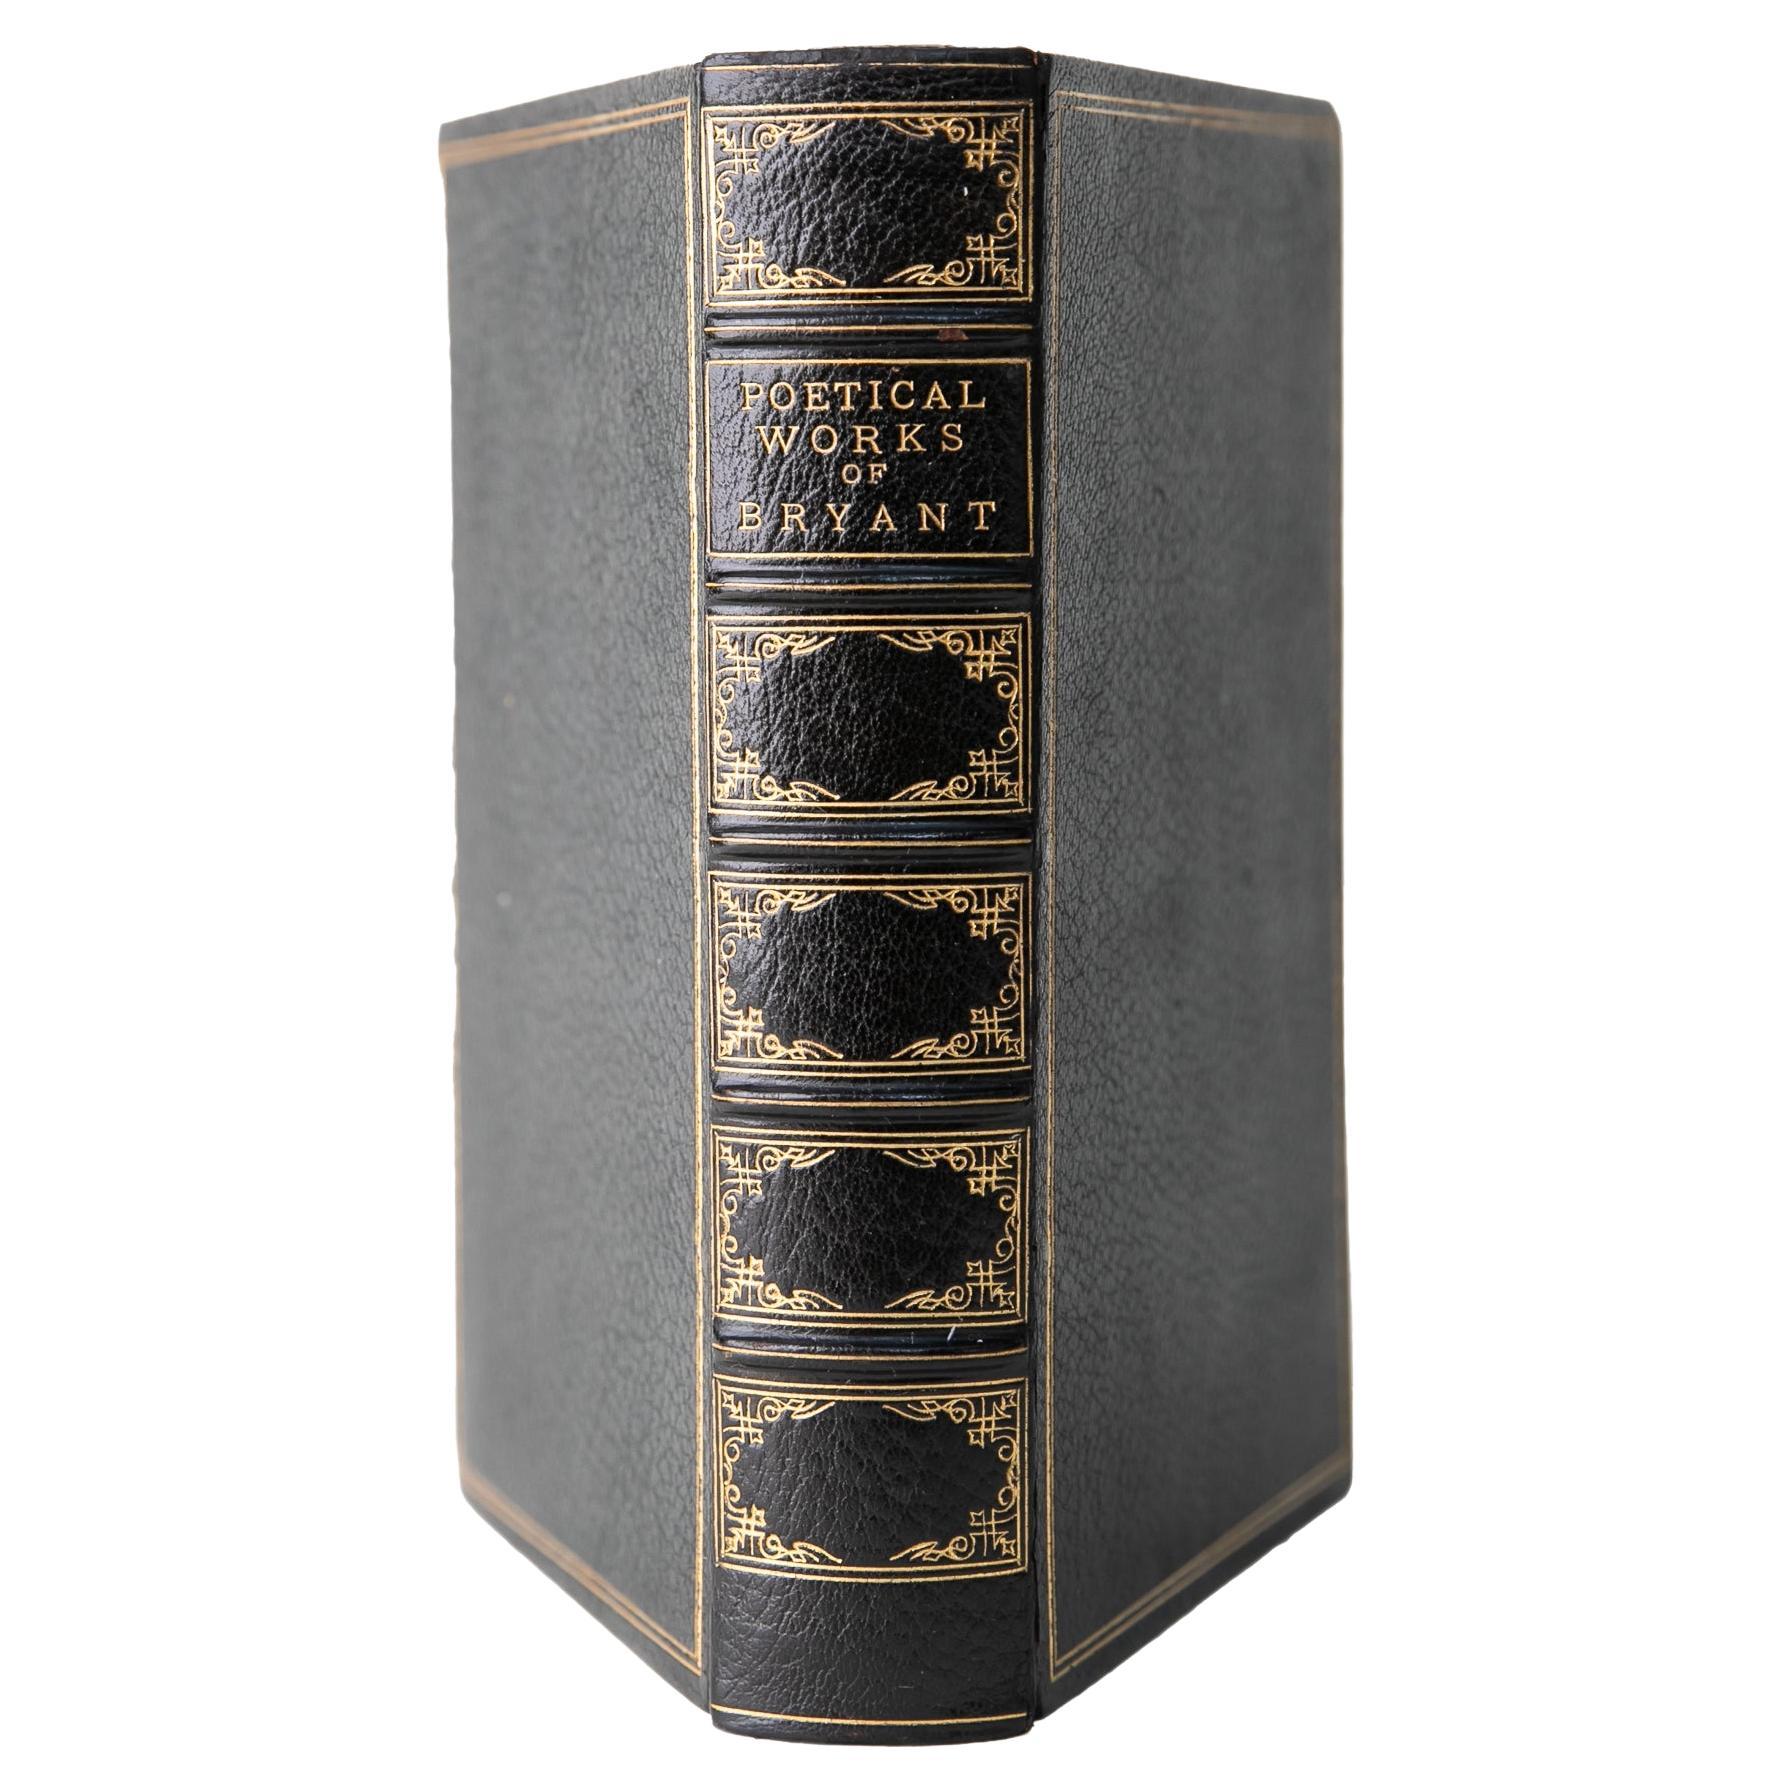 1 Volume. William Cullen Bryant, The Poetical Works.